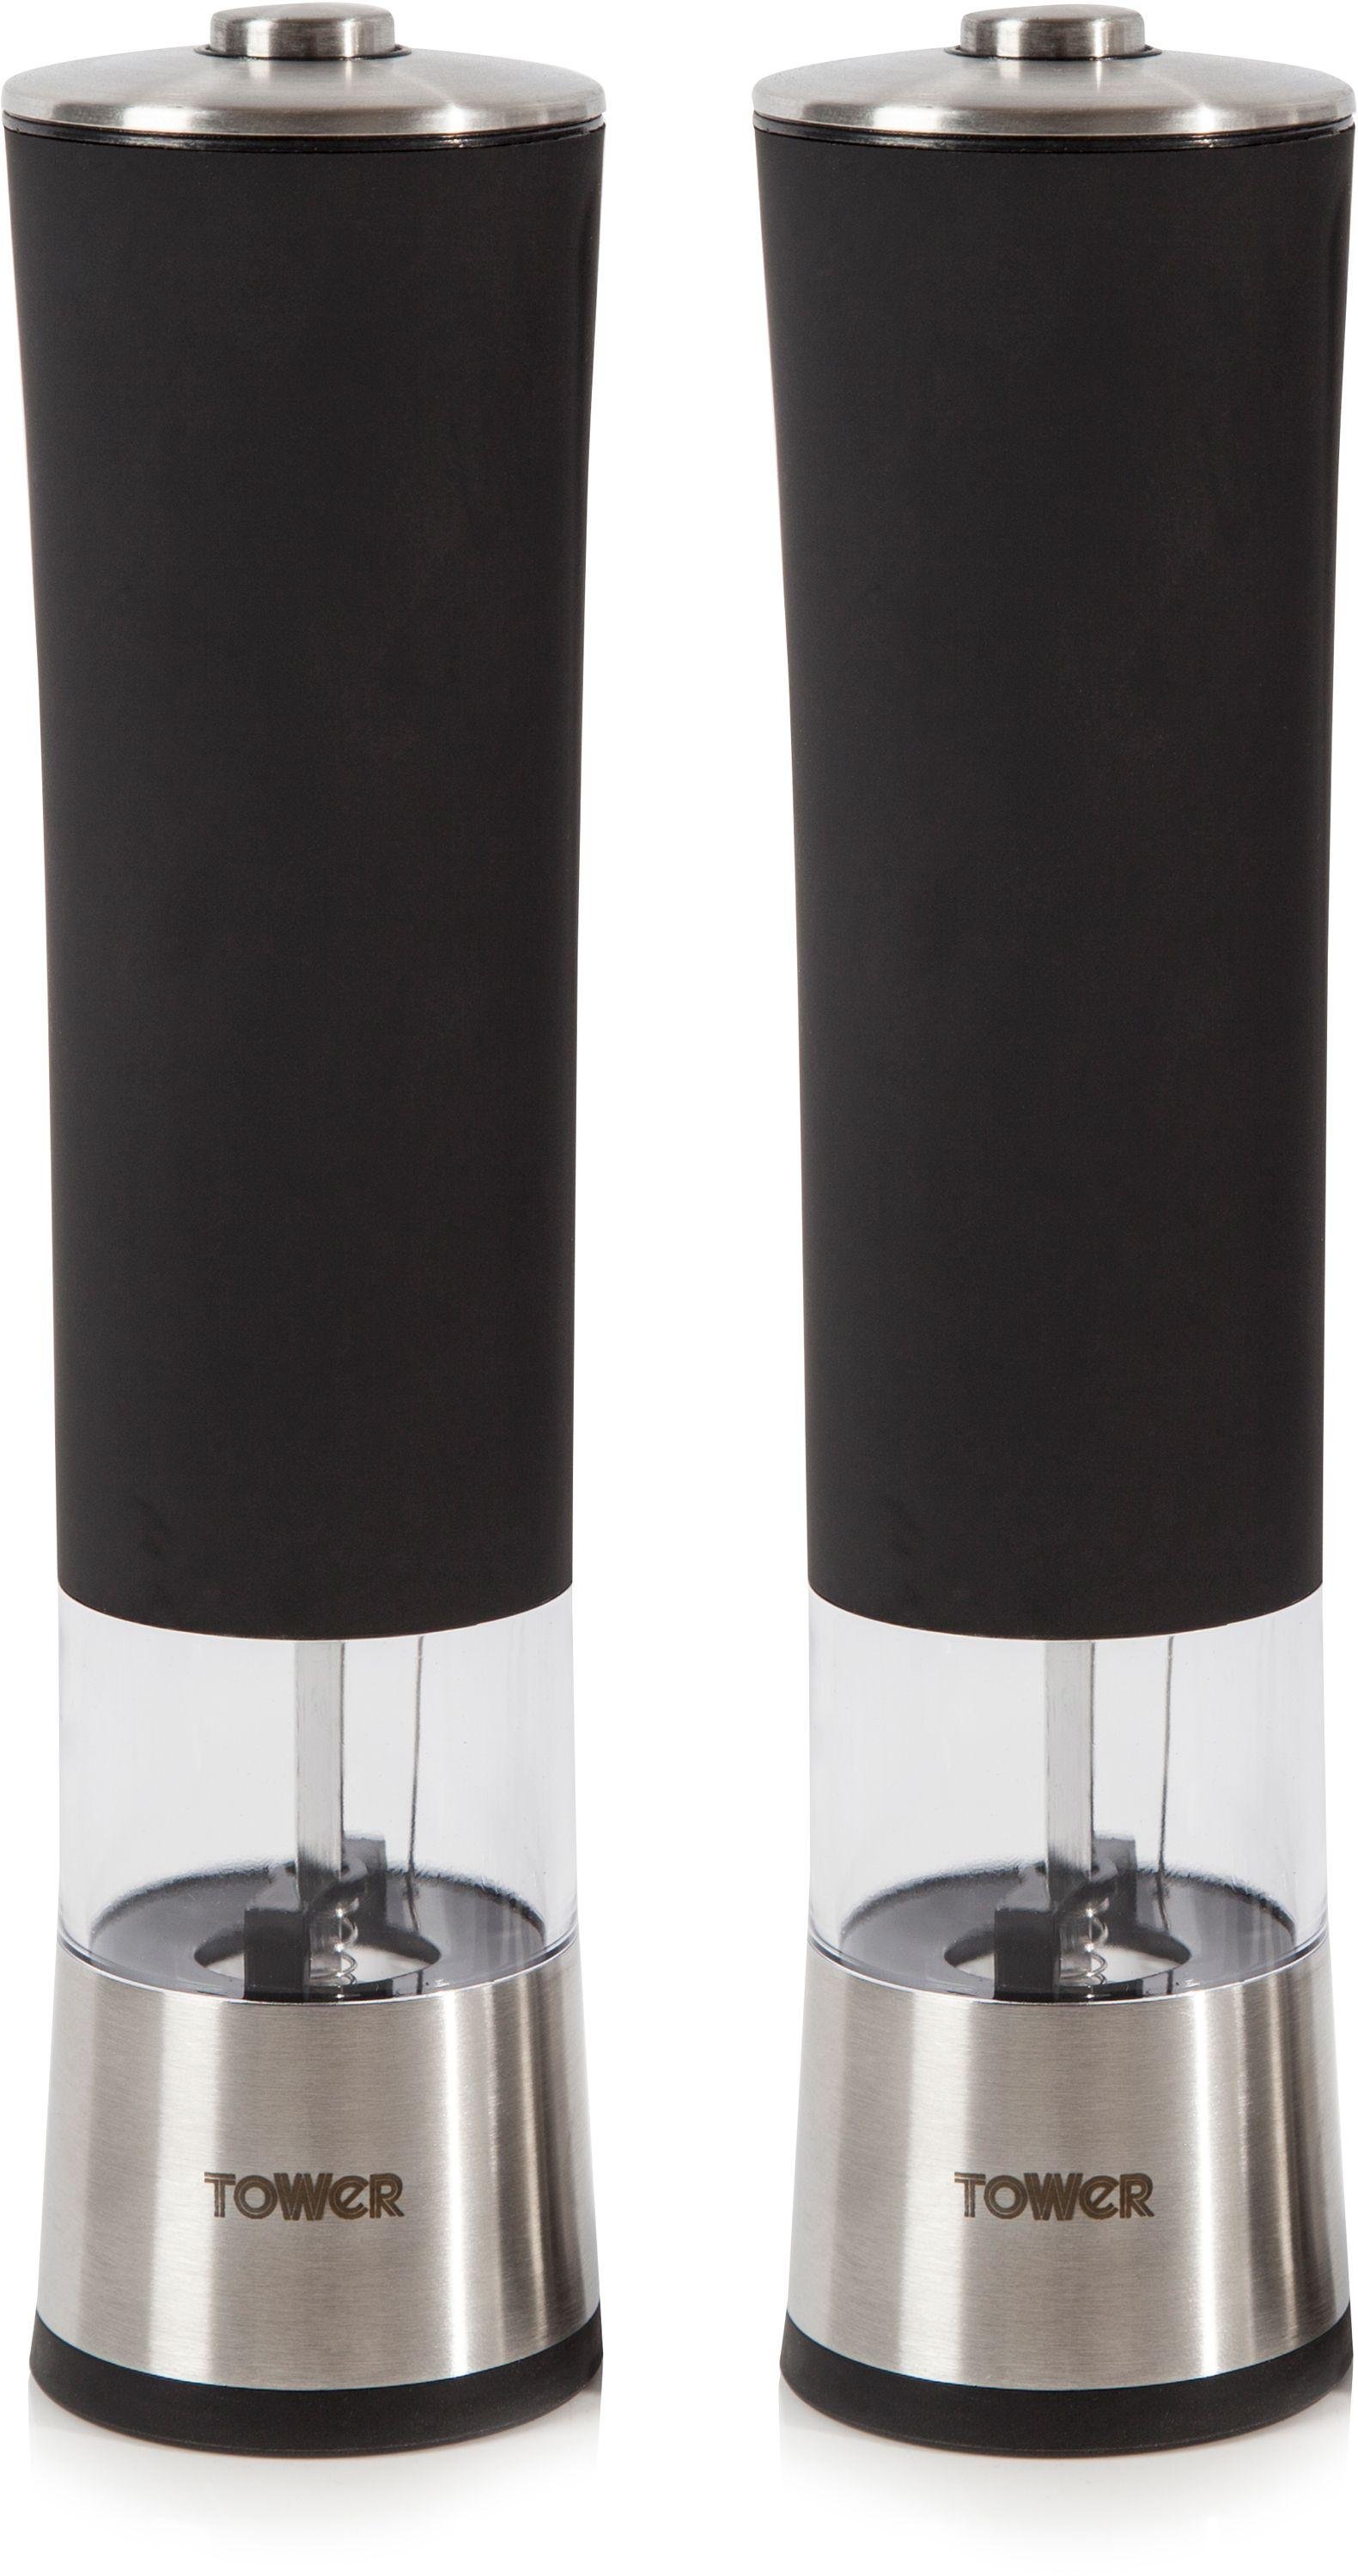 Tower Electric Salt and Pepper Mill Twin Pack.